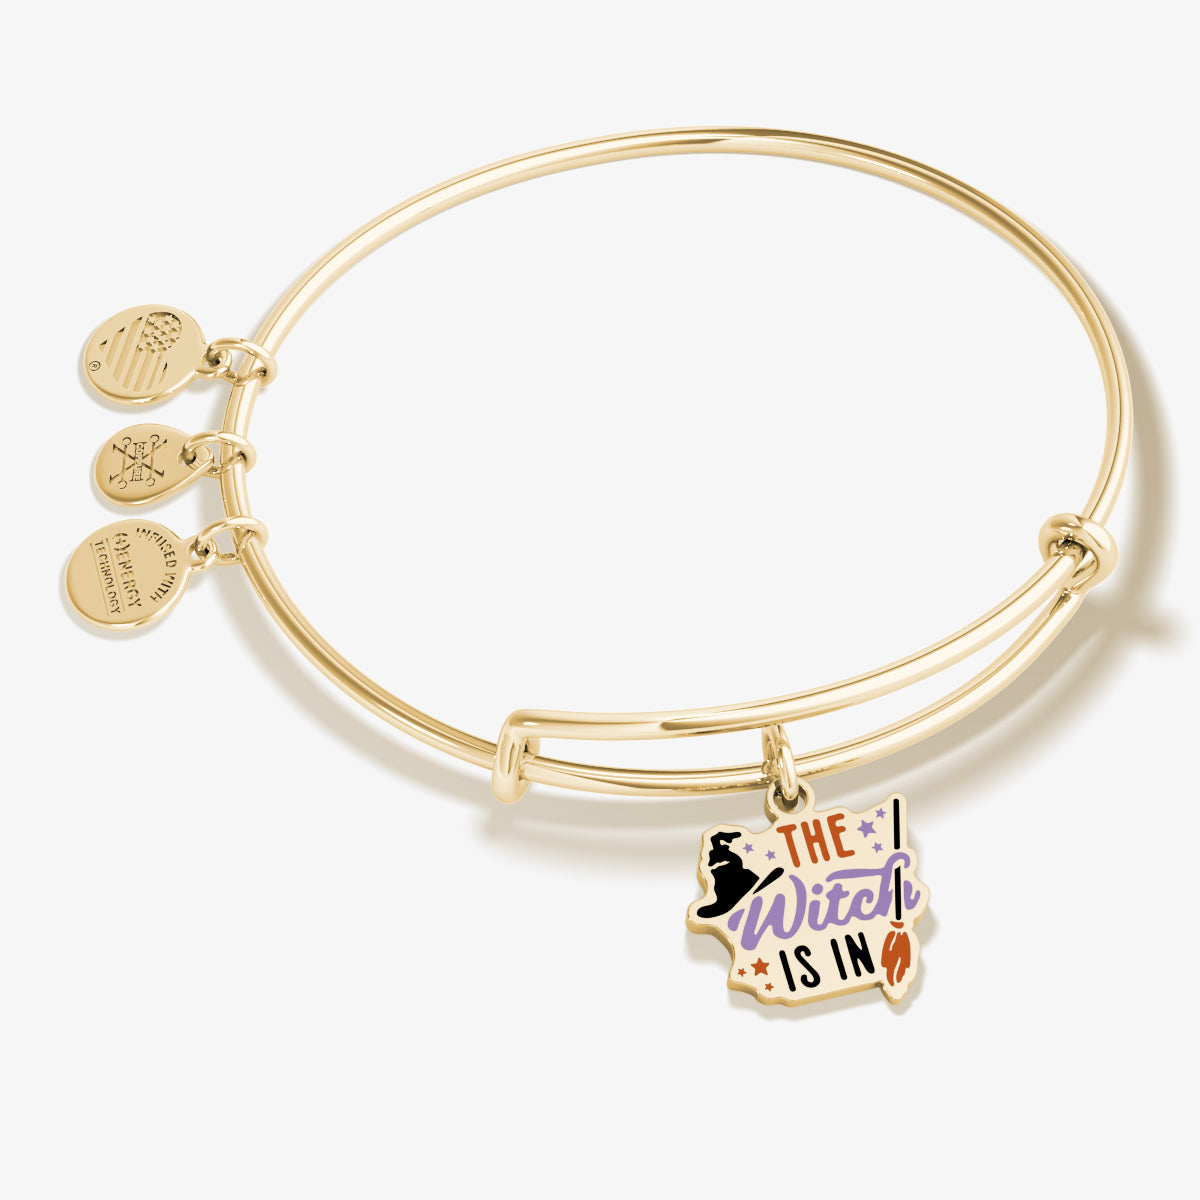 'The Witch Is In' Charm Bangle Bracelet